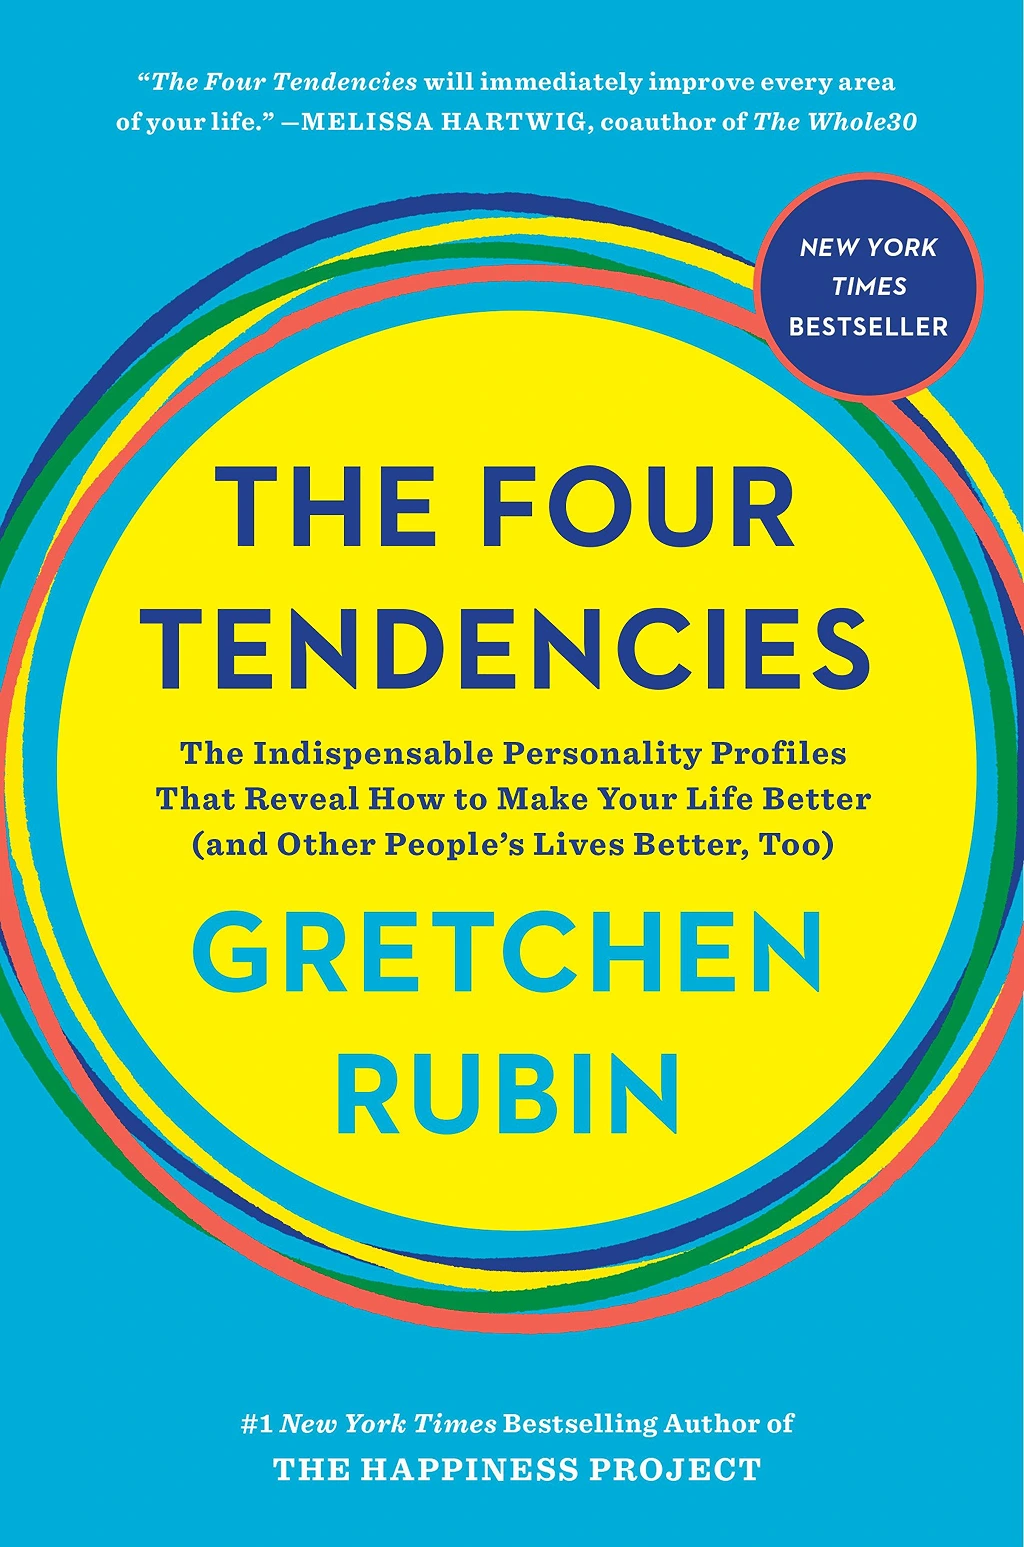 The-Four-Tendencies-The-Indispensable-Personality-Profiles-That-Reveal-How-to-Make-Your-Life-Better-by-Gretchen-Rubin